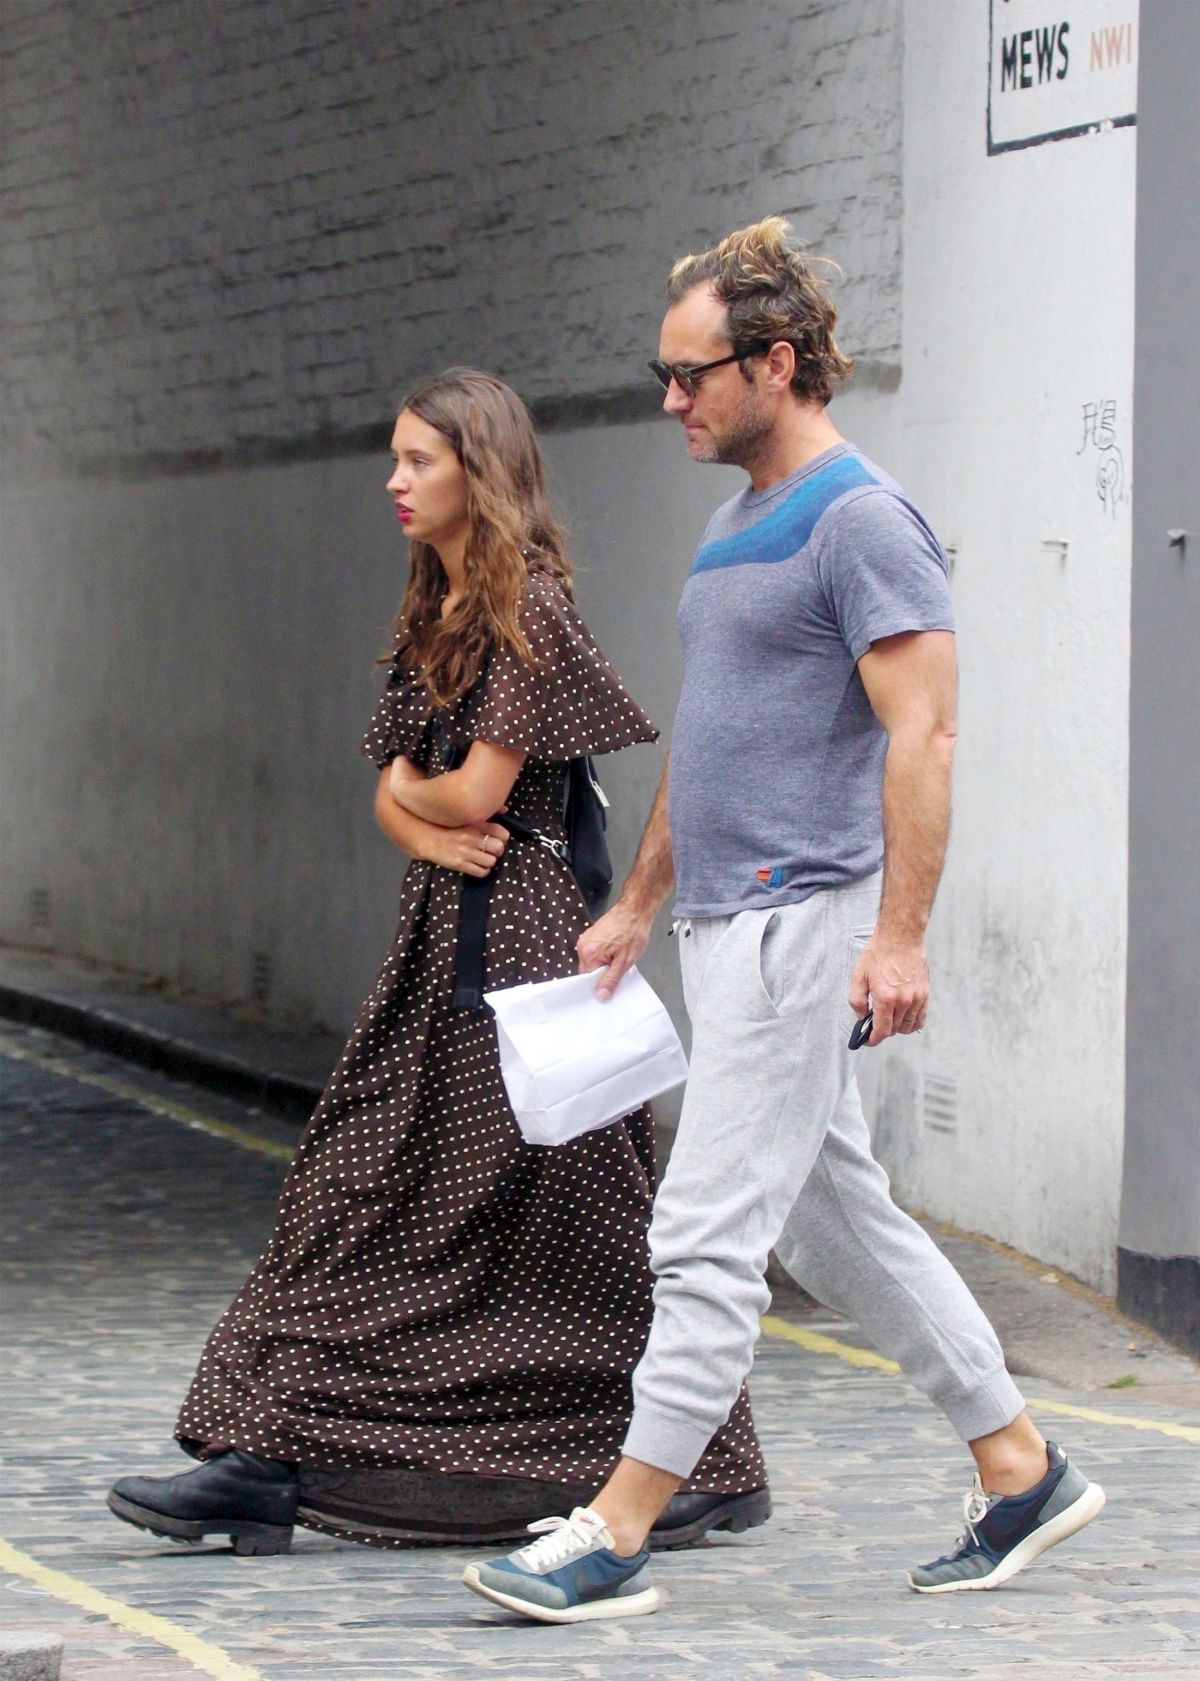 iris-and-jude-law-out-for-lunch-in-london-07-14-2019-1.jpg